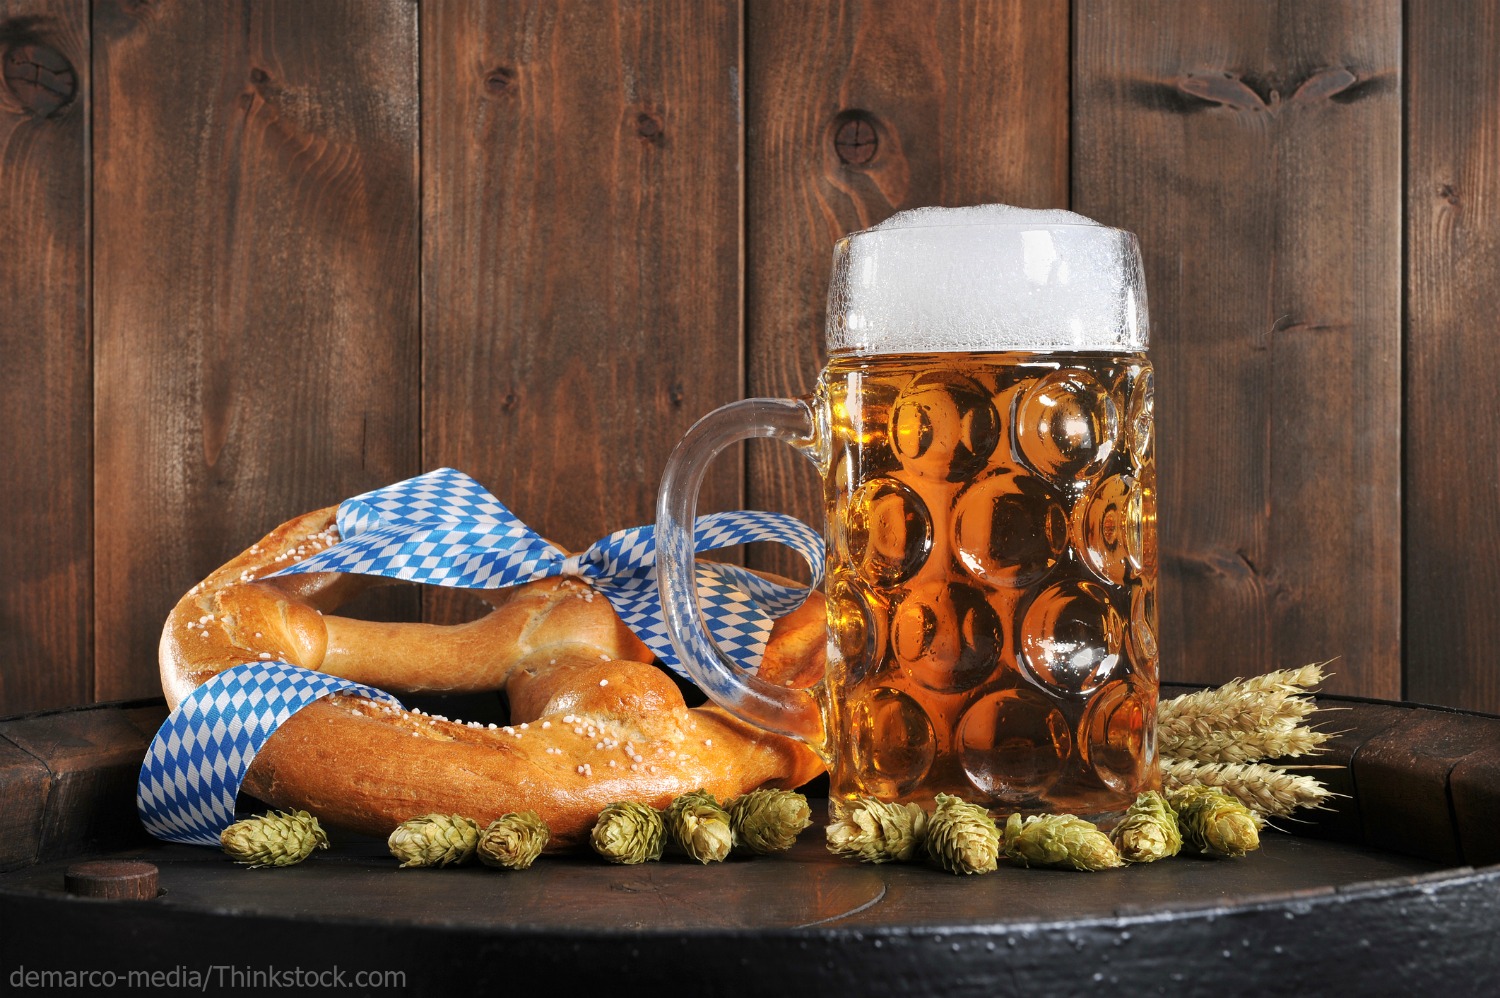 Don’t Miss These Incredible Oktoberfest Celebrations This Year